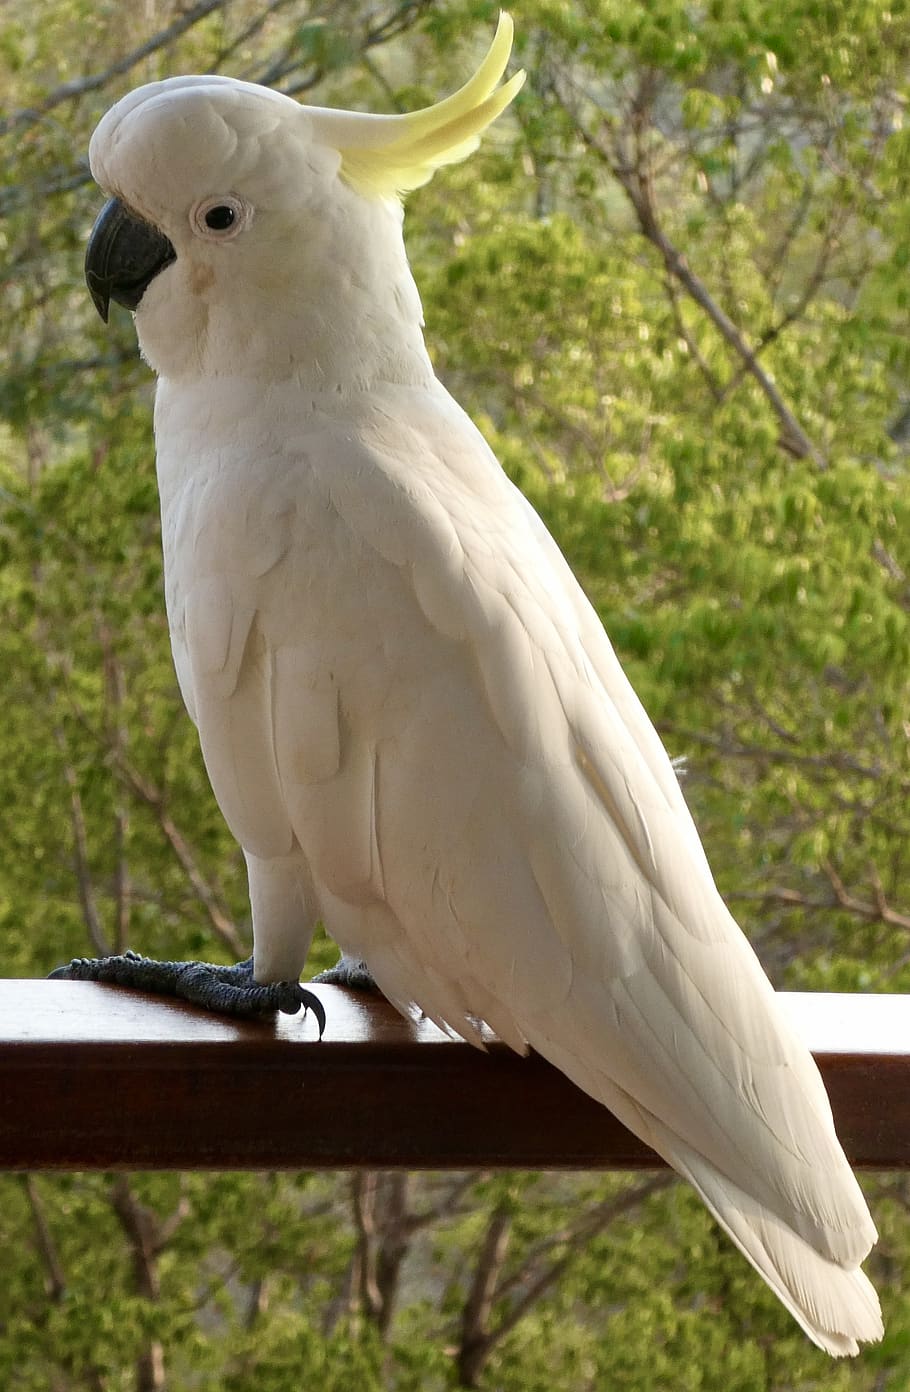 cockatoo, australia, yellow, white, wildlife, plumage, perched, crested, feathers, sulphur-crested